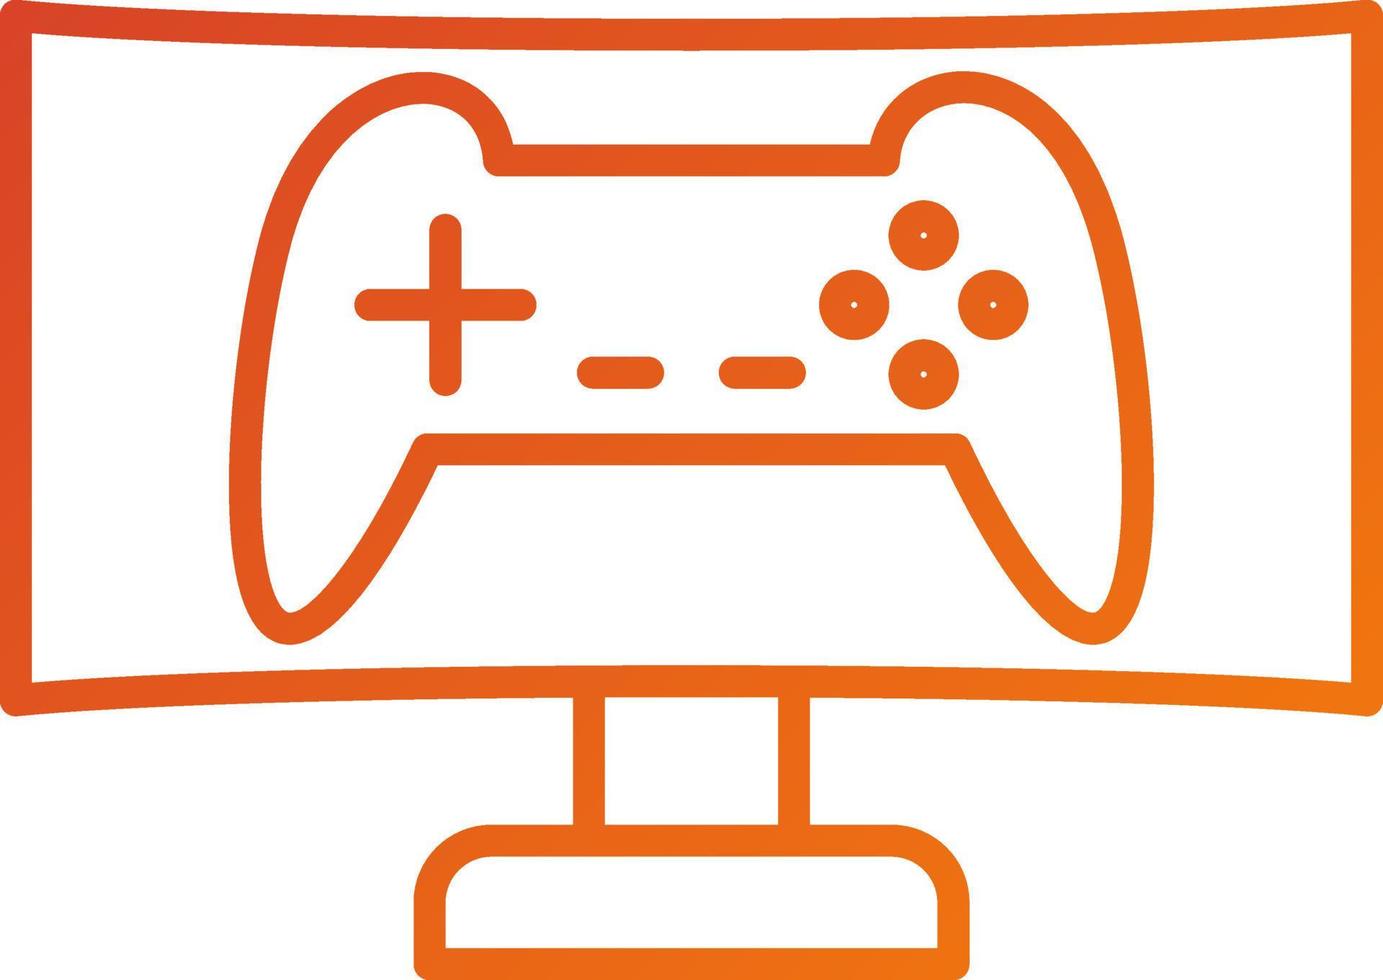 Gaming Monitor Icon Style vector